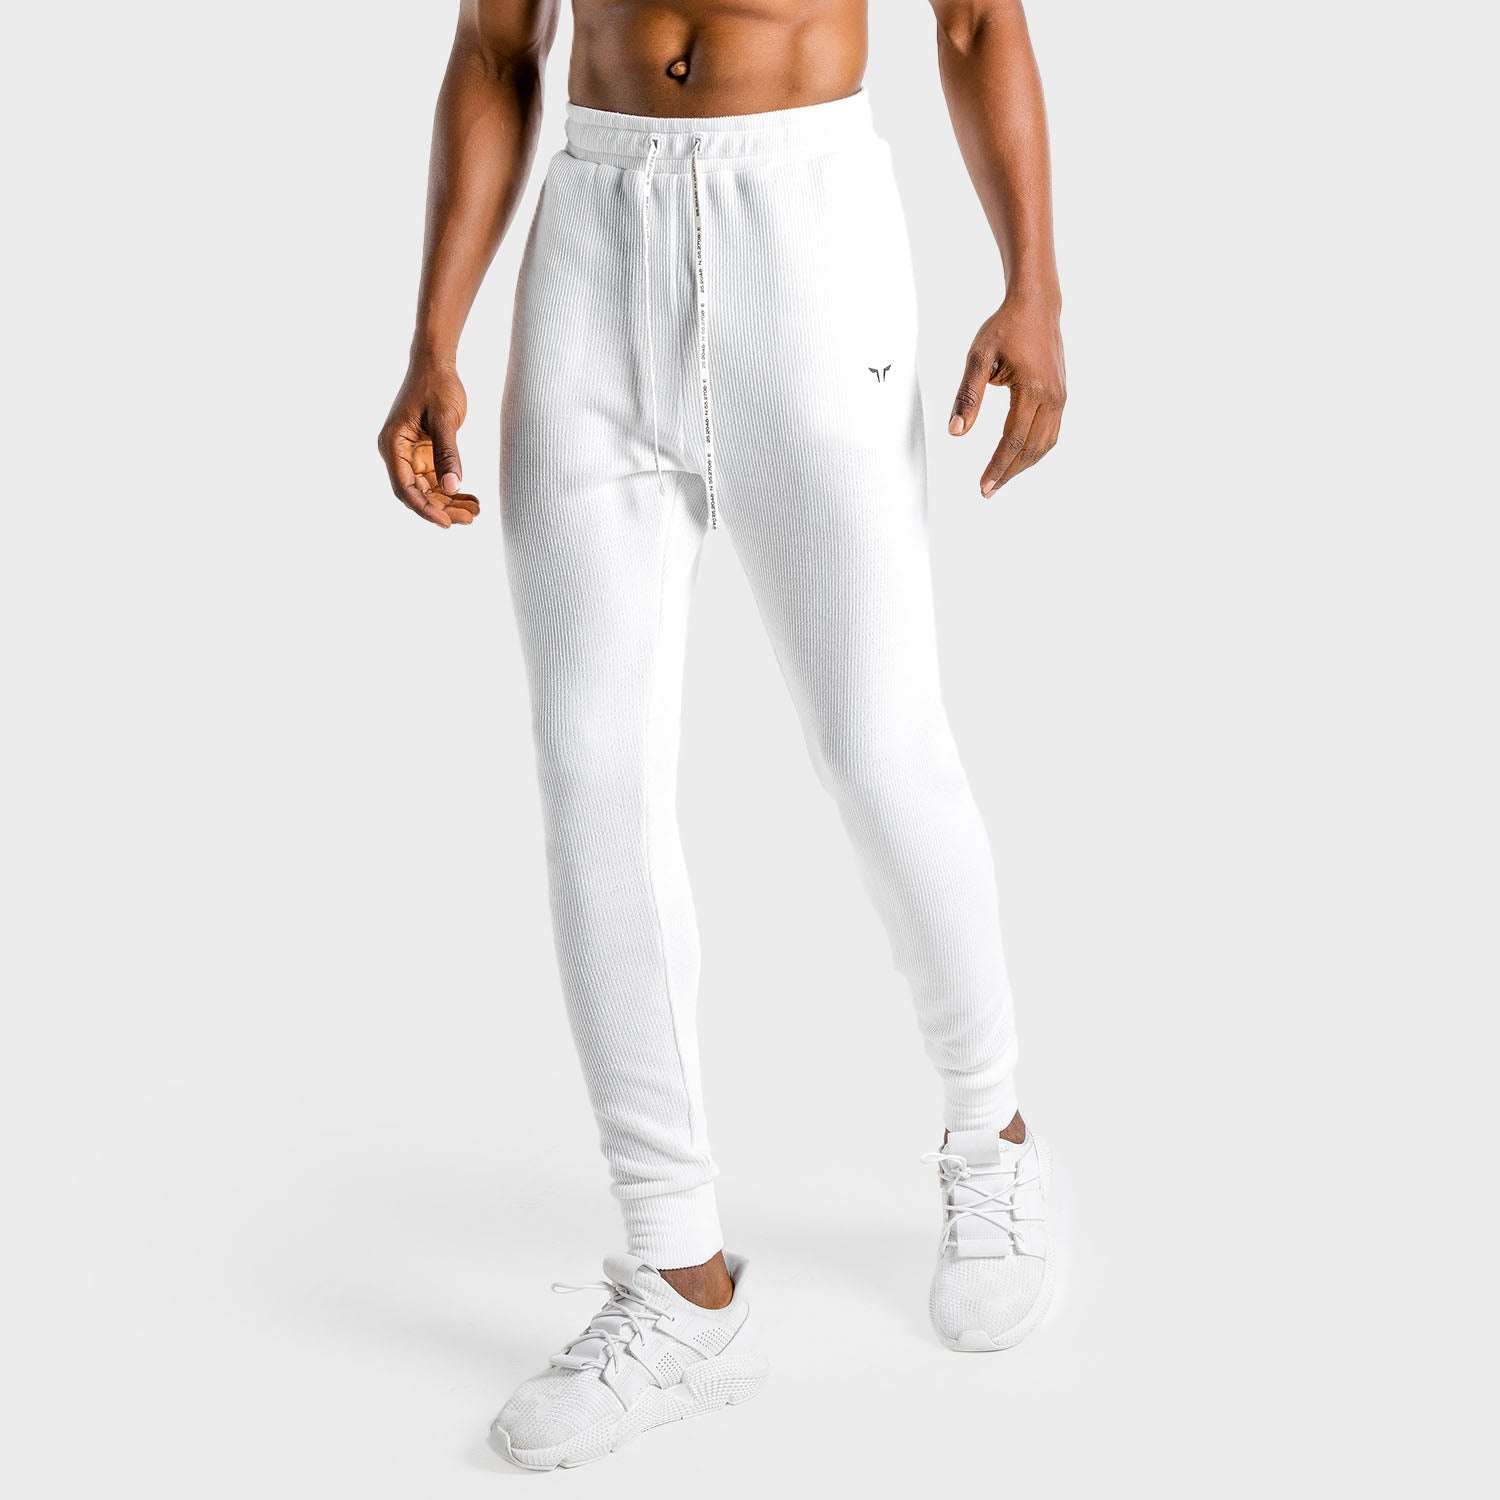 CA, Luxe Joggers - White, Gym Jogger Men